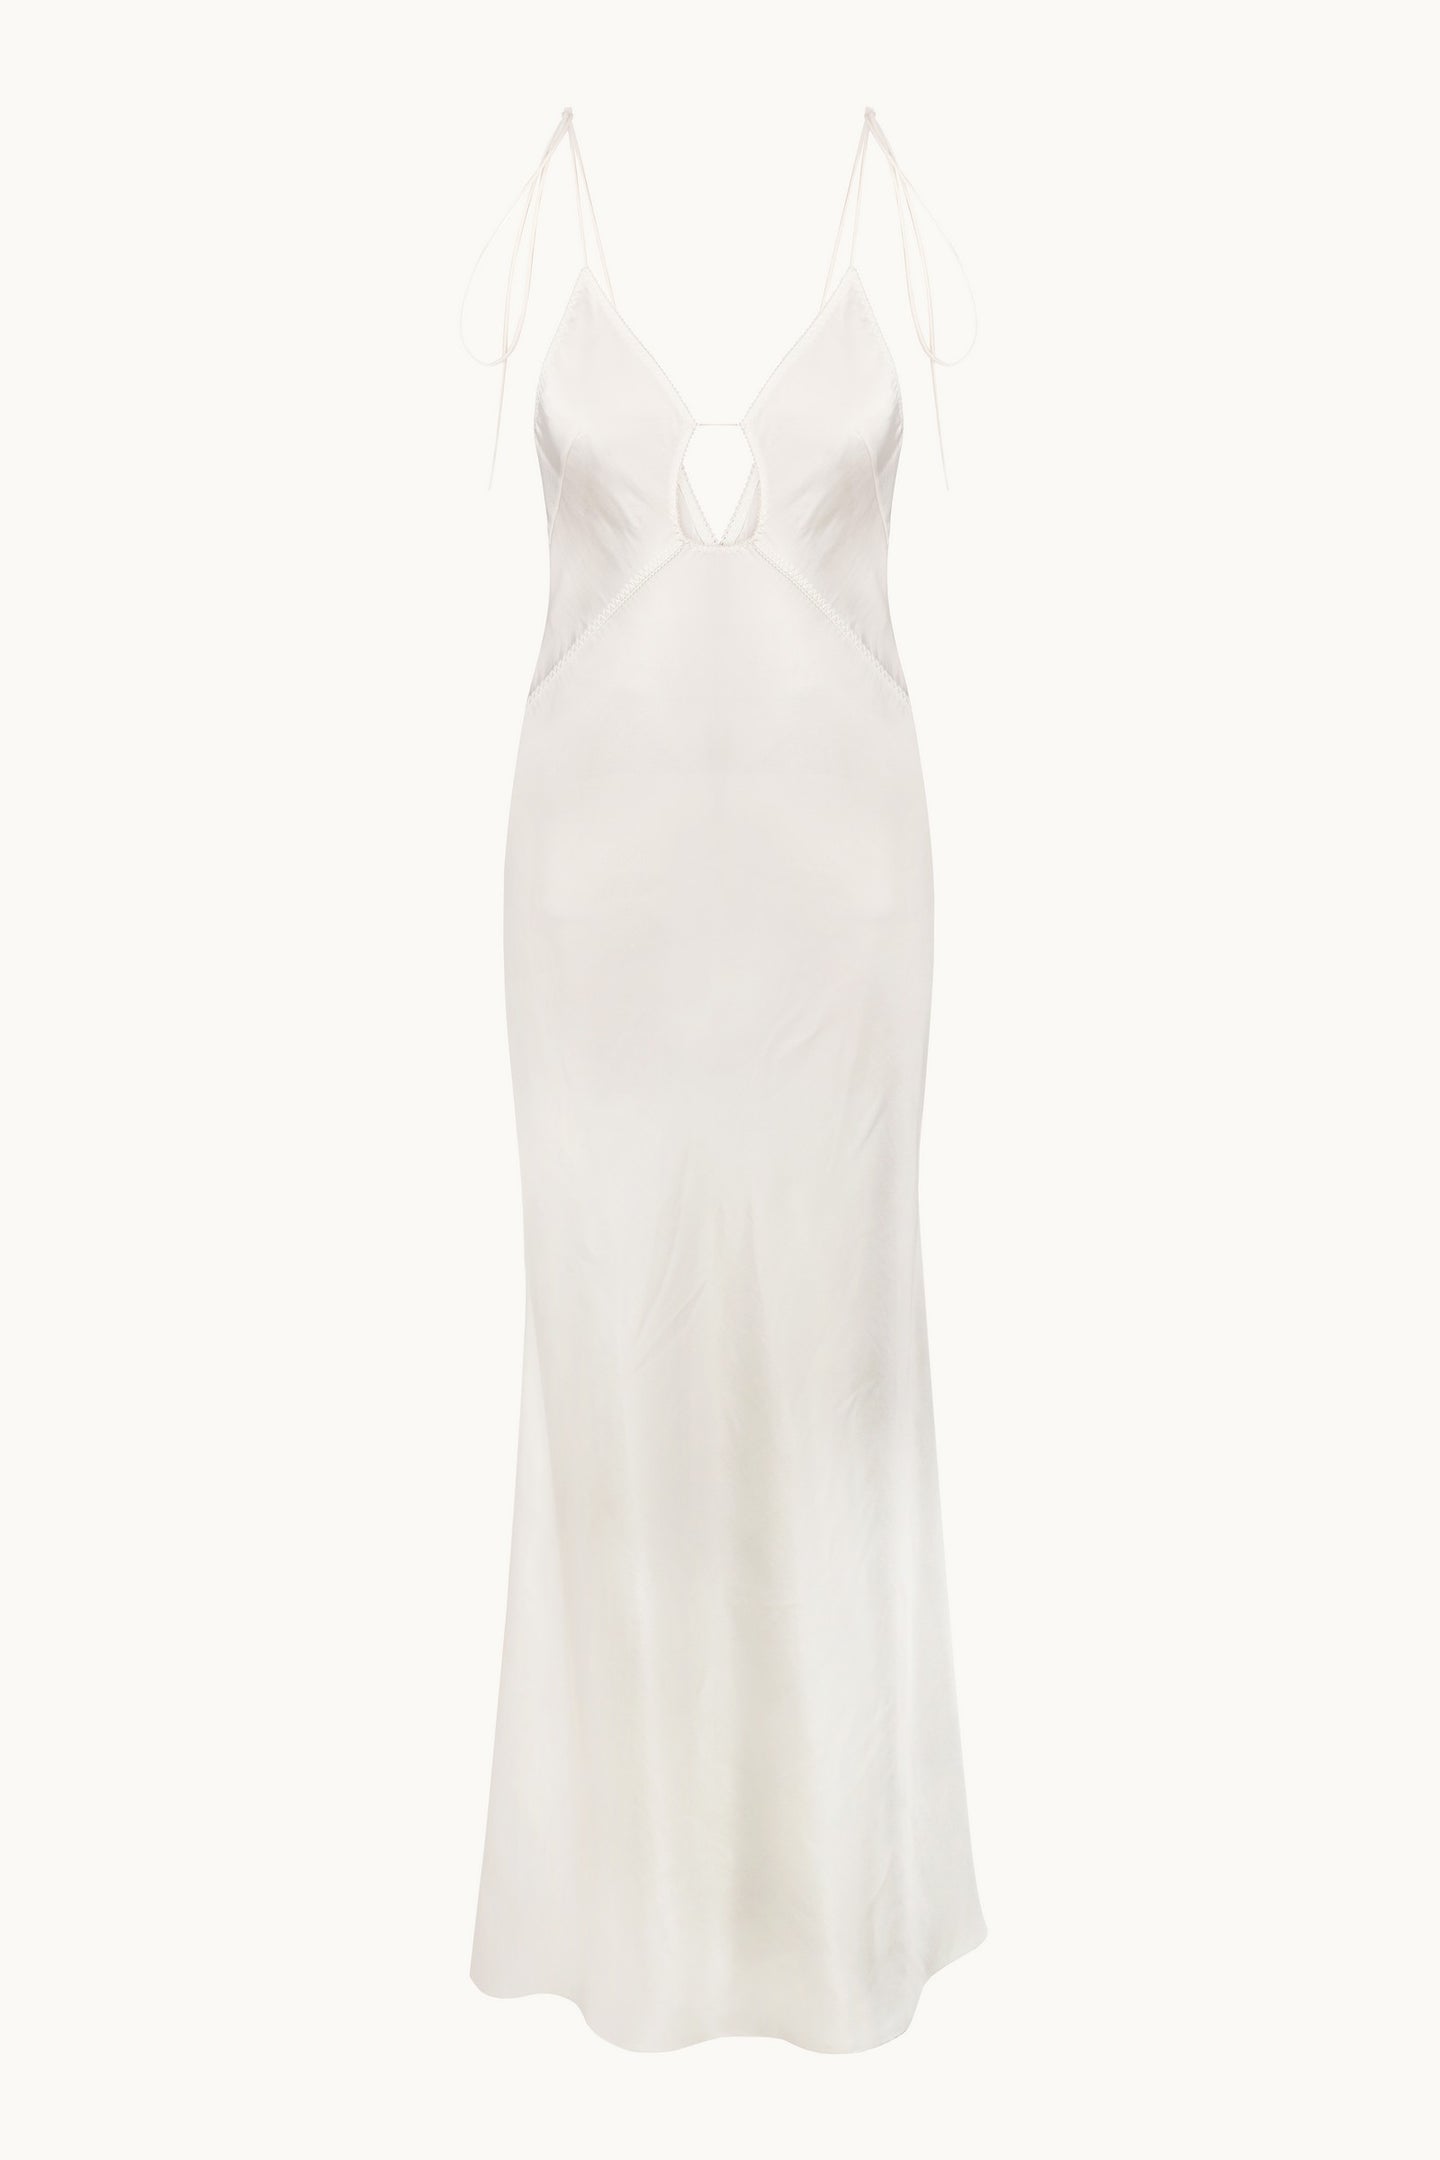 Terrin ivory dress front view